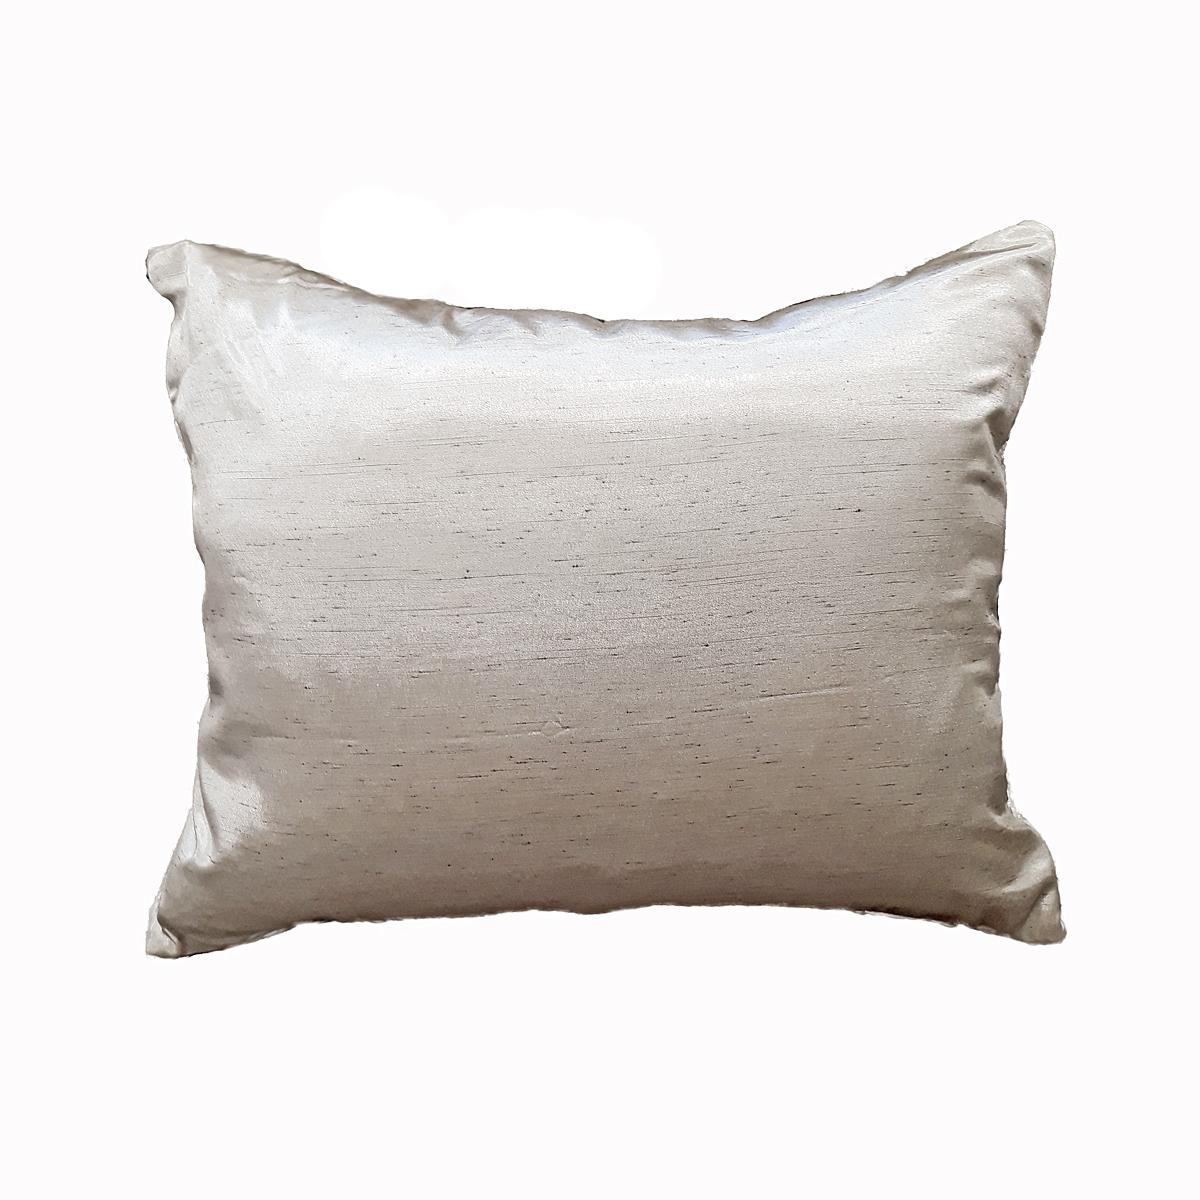 Contemporary Hand-embroidered Silk Pillow from India